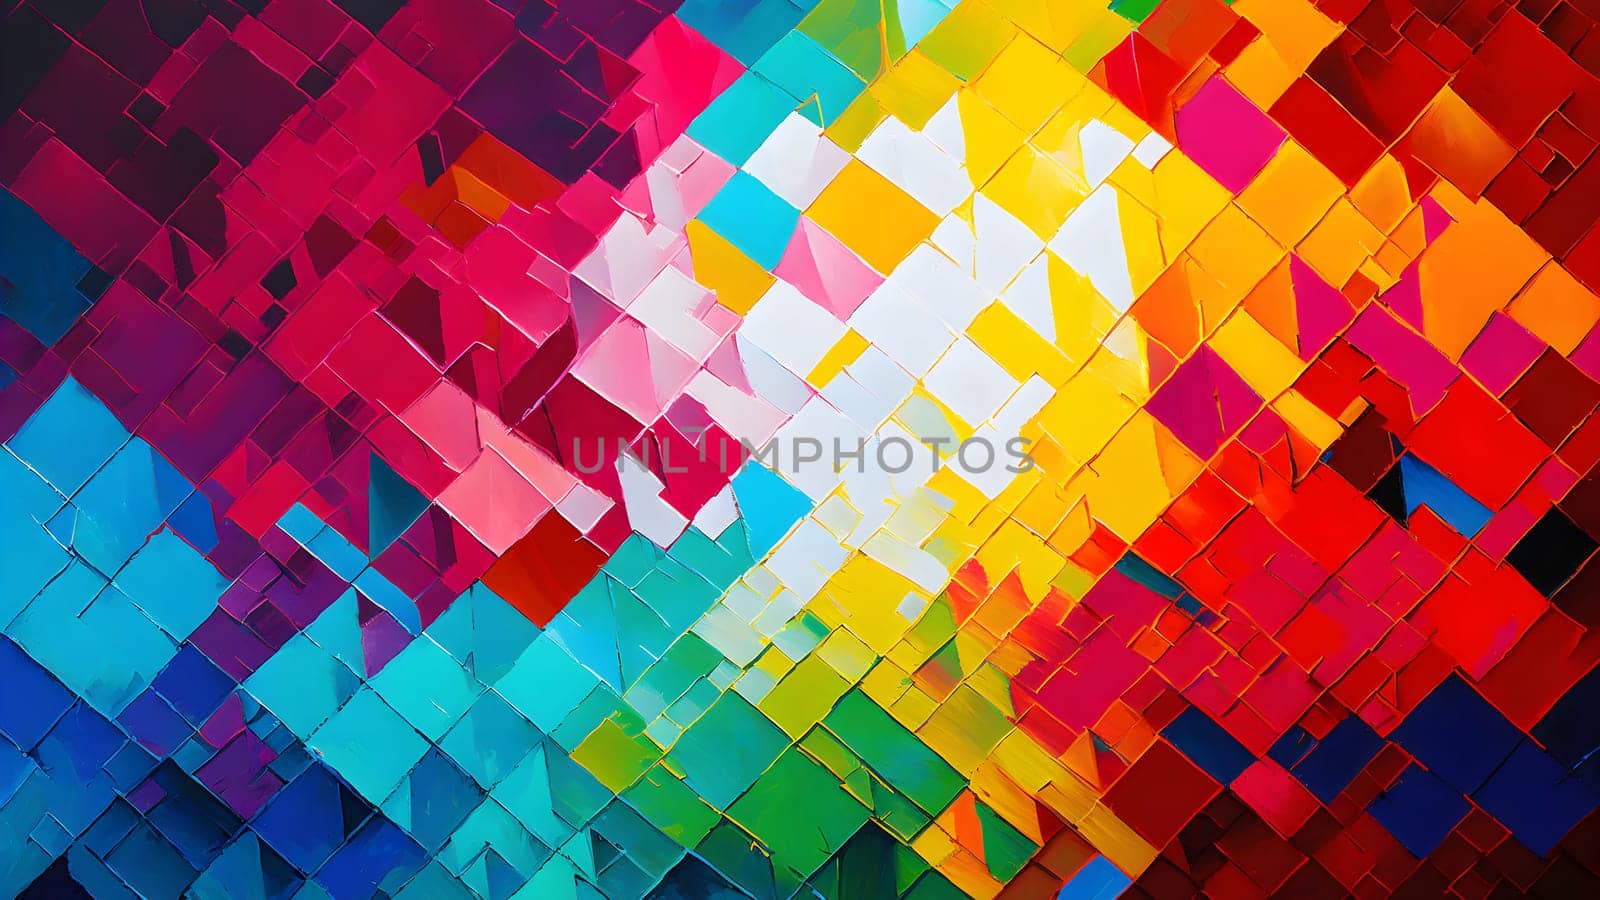 modern abstract knife oil painting, beautiful colourful geometric pattern and wallpaper, neural network generated art. Digitally generated image. Not based on any actual person, scene or pattern.